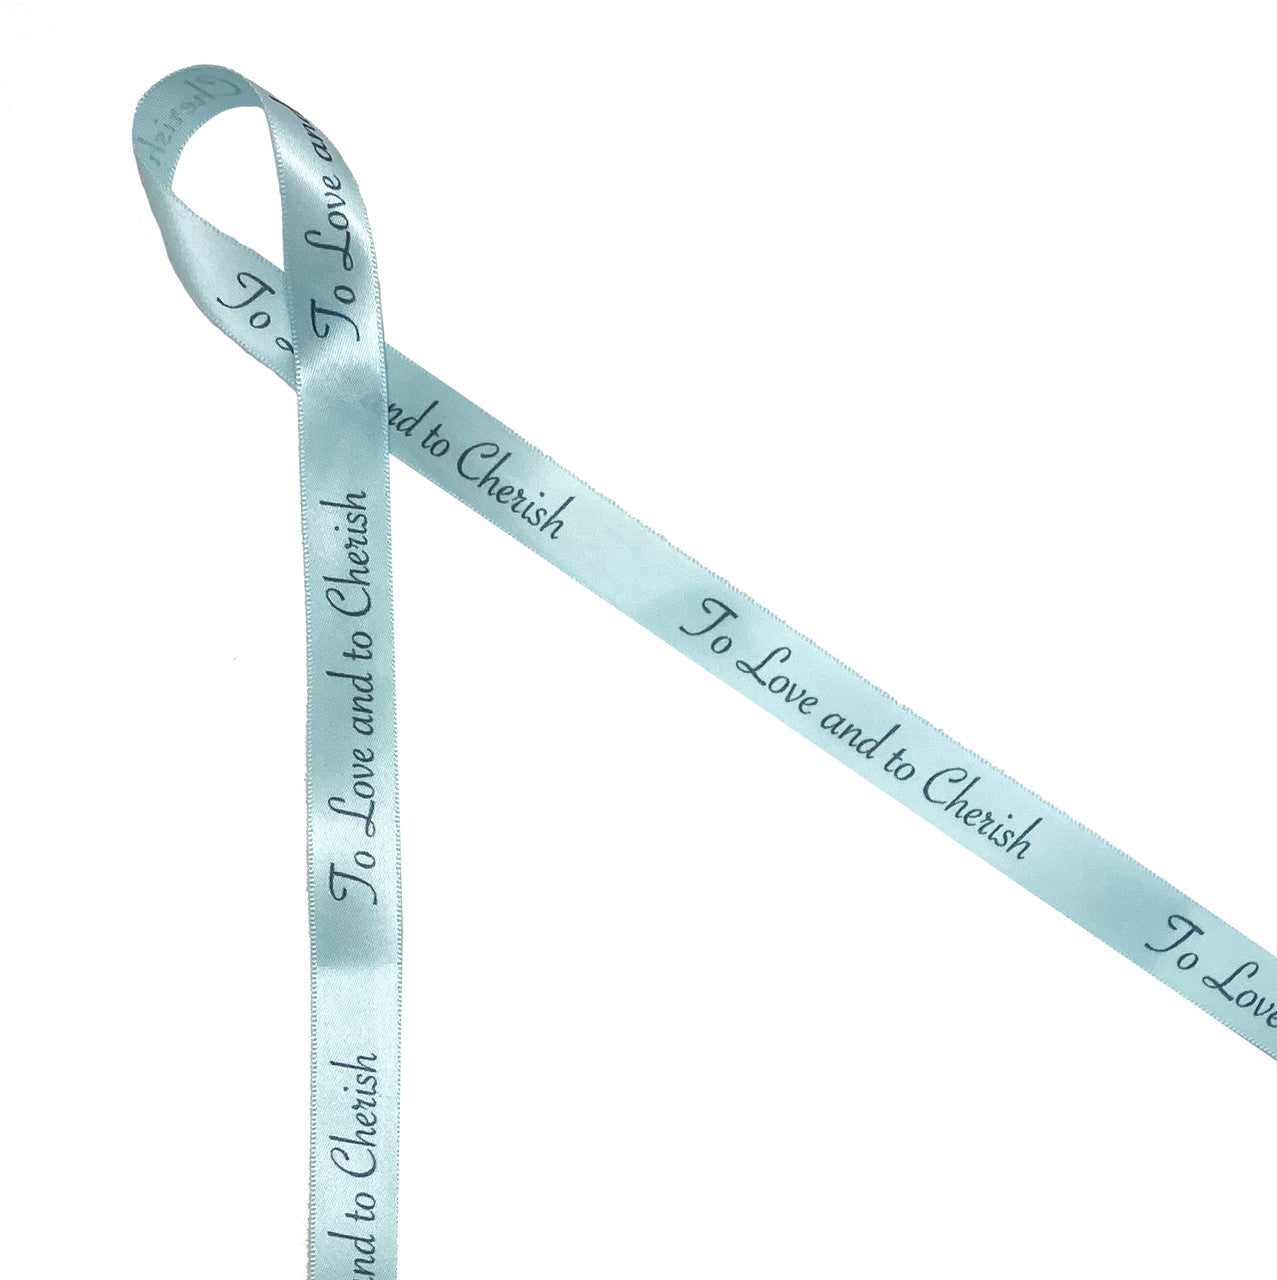 To Love and to Cherish Ribbon Gray Ink on 5/8" wide Light Blue Satin Ribbon